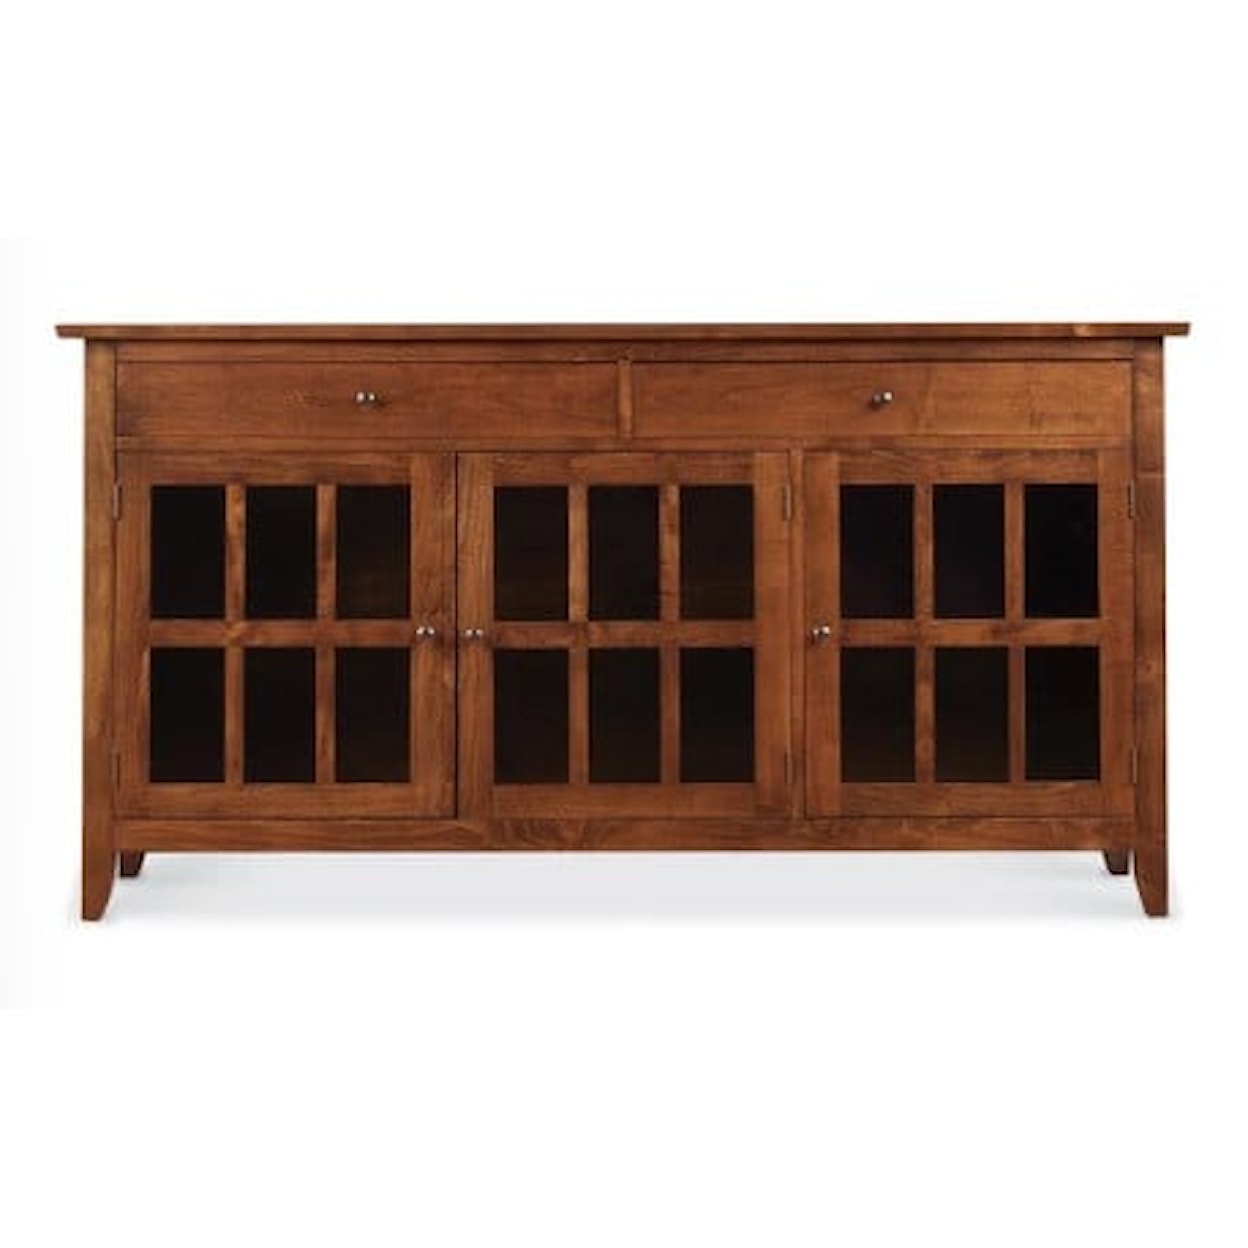 Stickley Nichols and Stone Collection CARLISLE HALL/ TV CONSOLE, OVERHANGING TOP